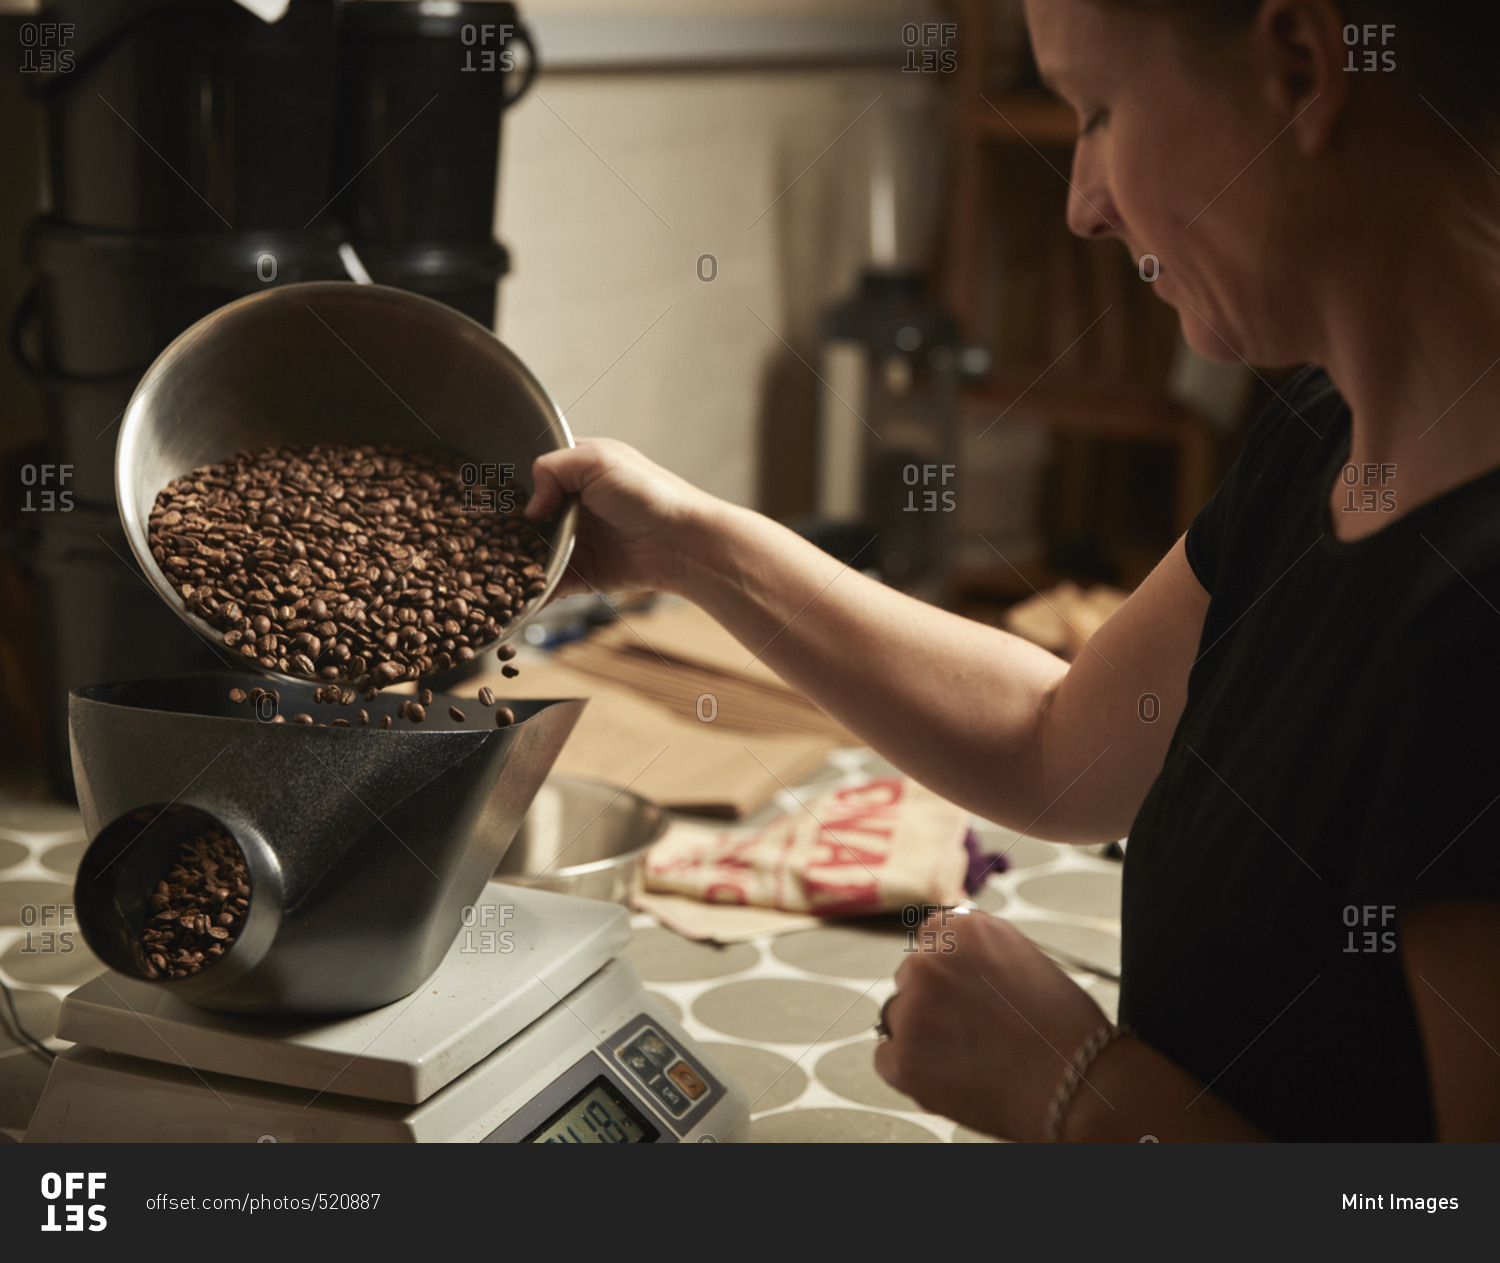 A coffee shop. A person pouring roasted coffee beans into a coffee grinder.